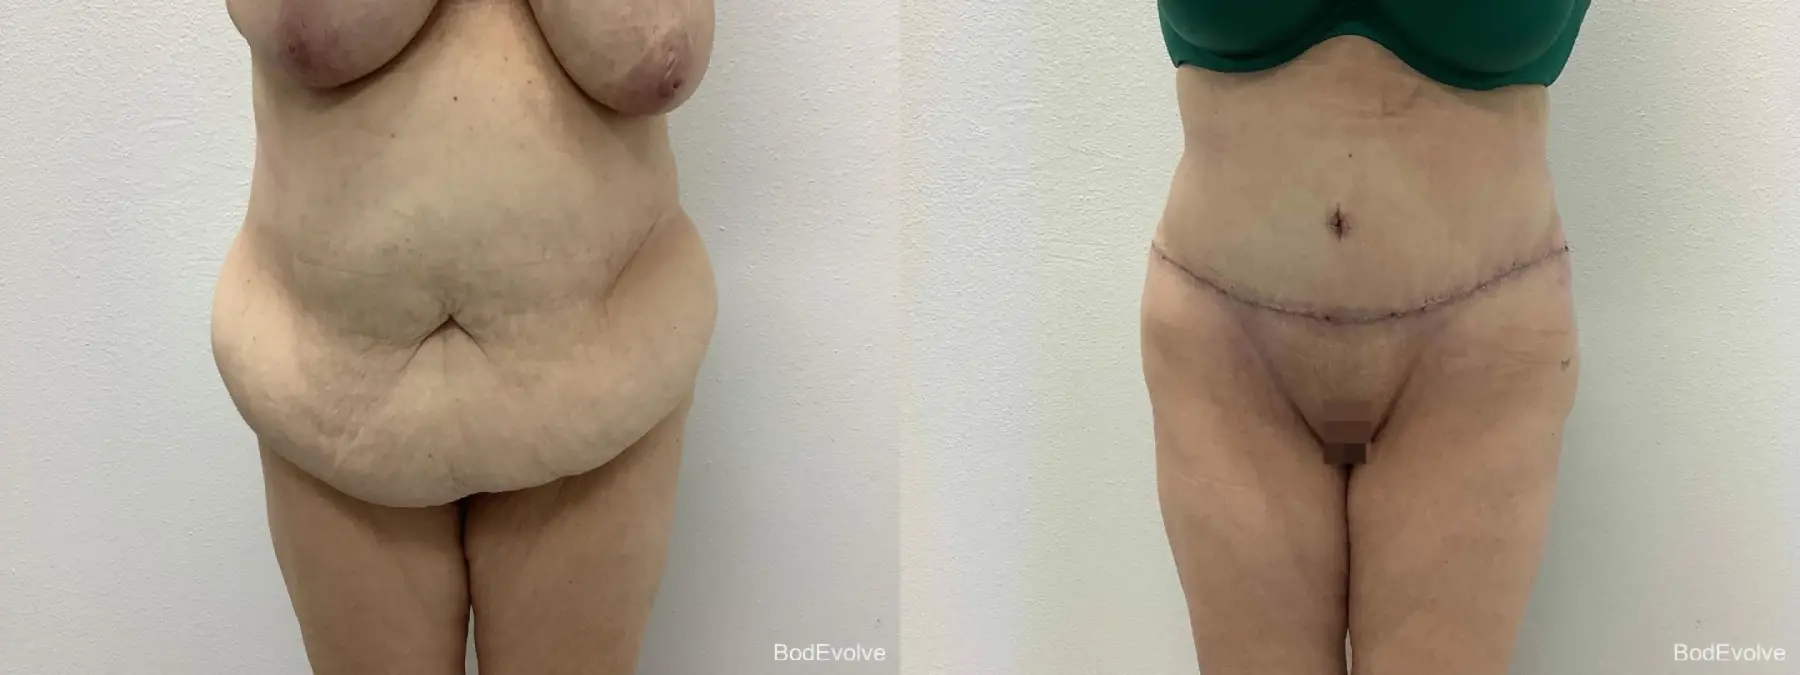 After Massive Weight Loss: Patient 2 - Before and After  